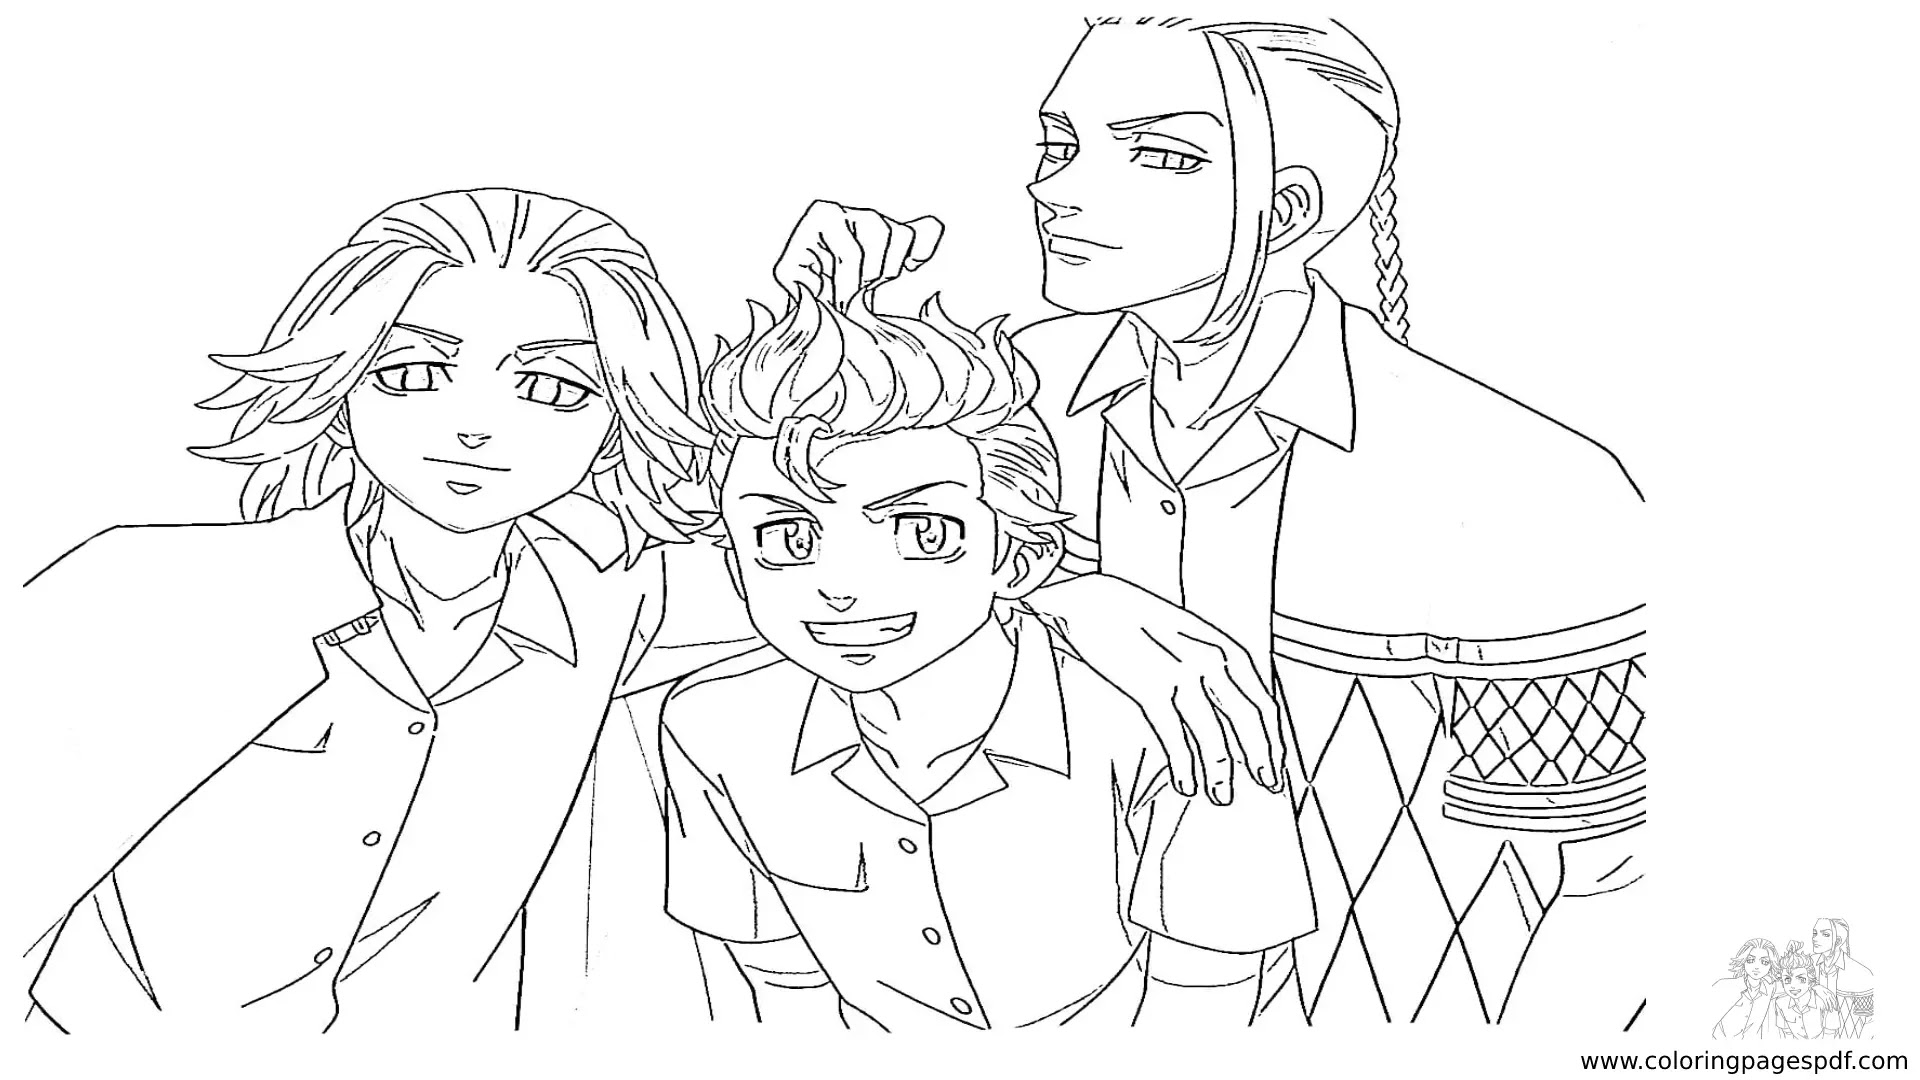 Coloring Page Of Takemichi, Mikey, And Draken (Tokyo Revengers)